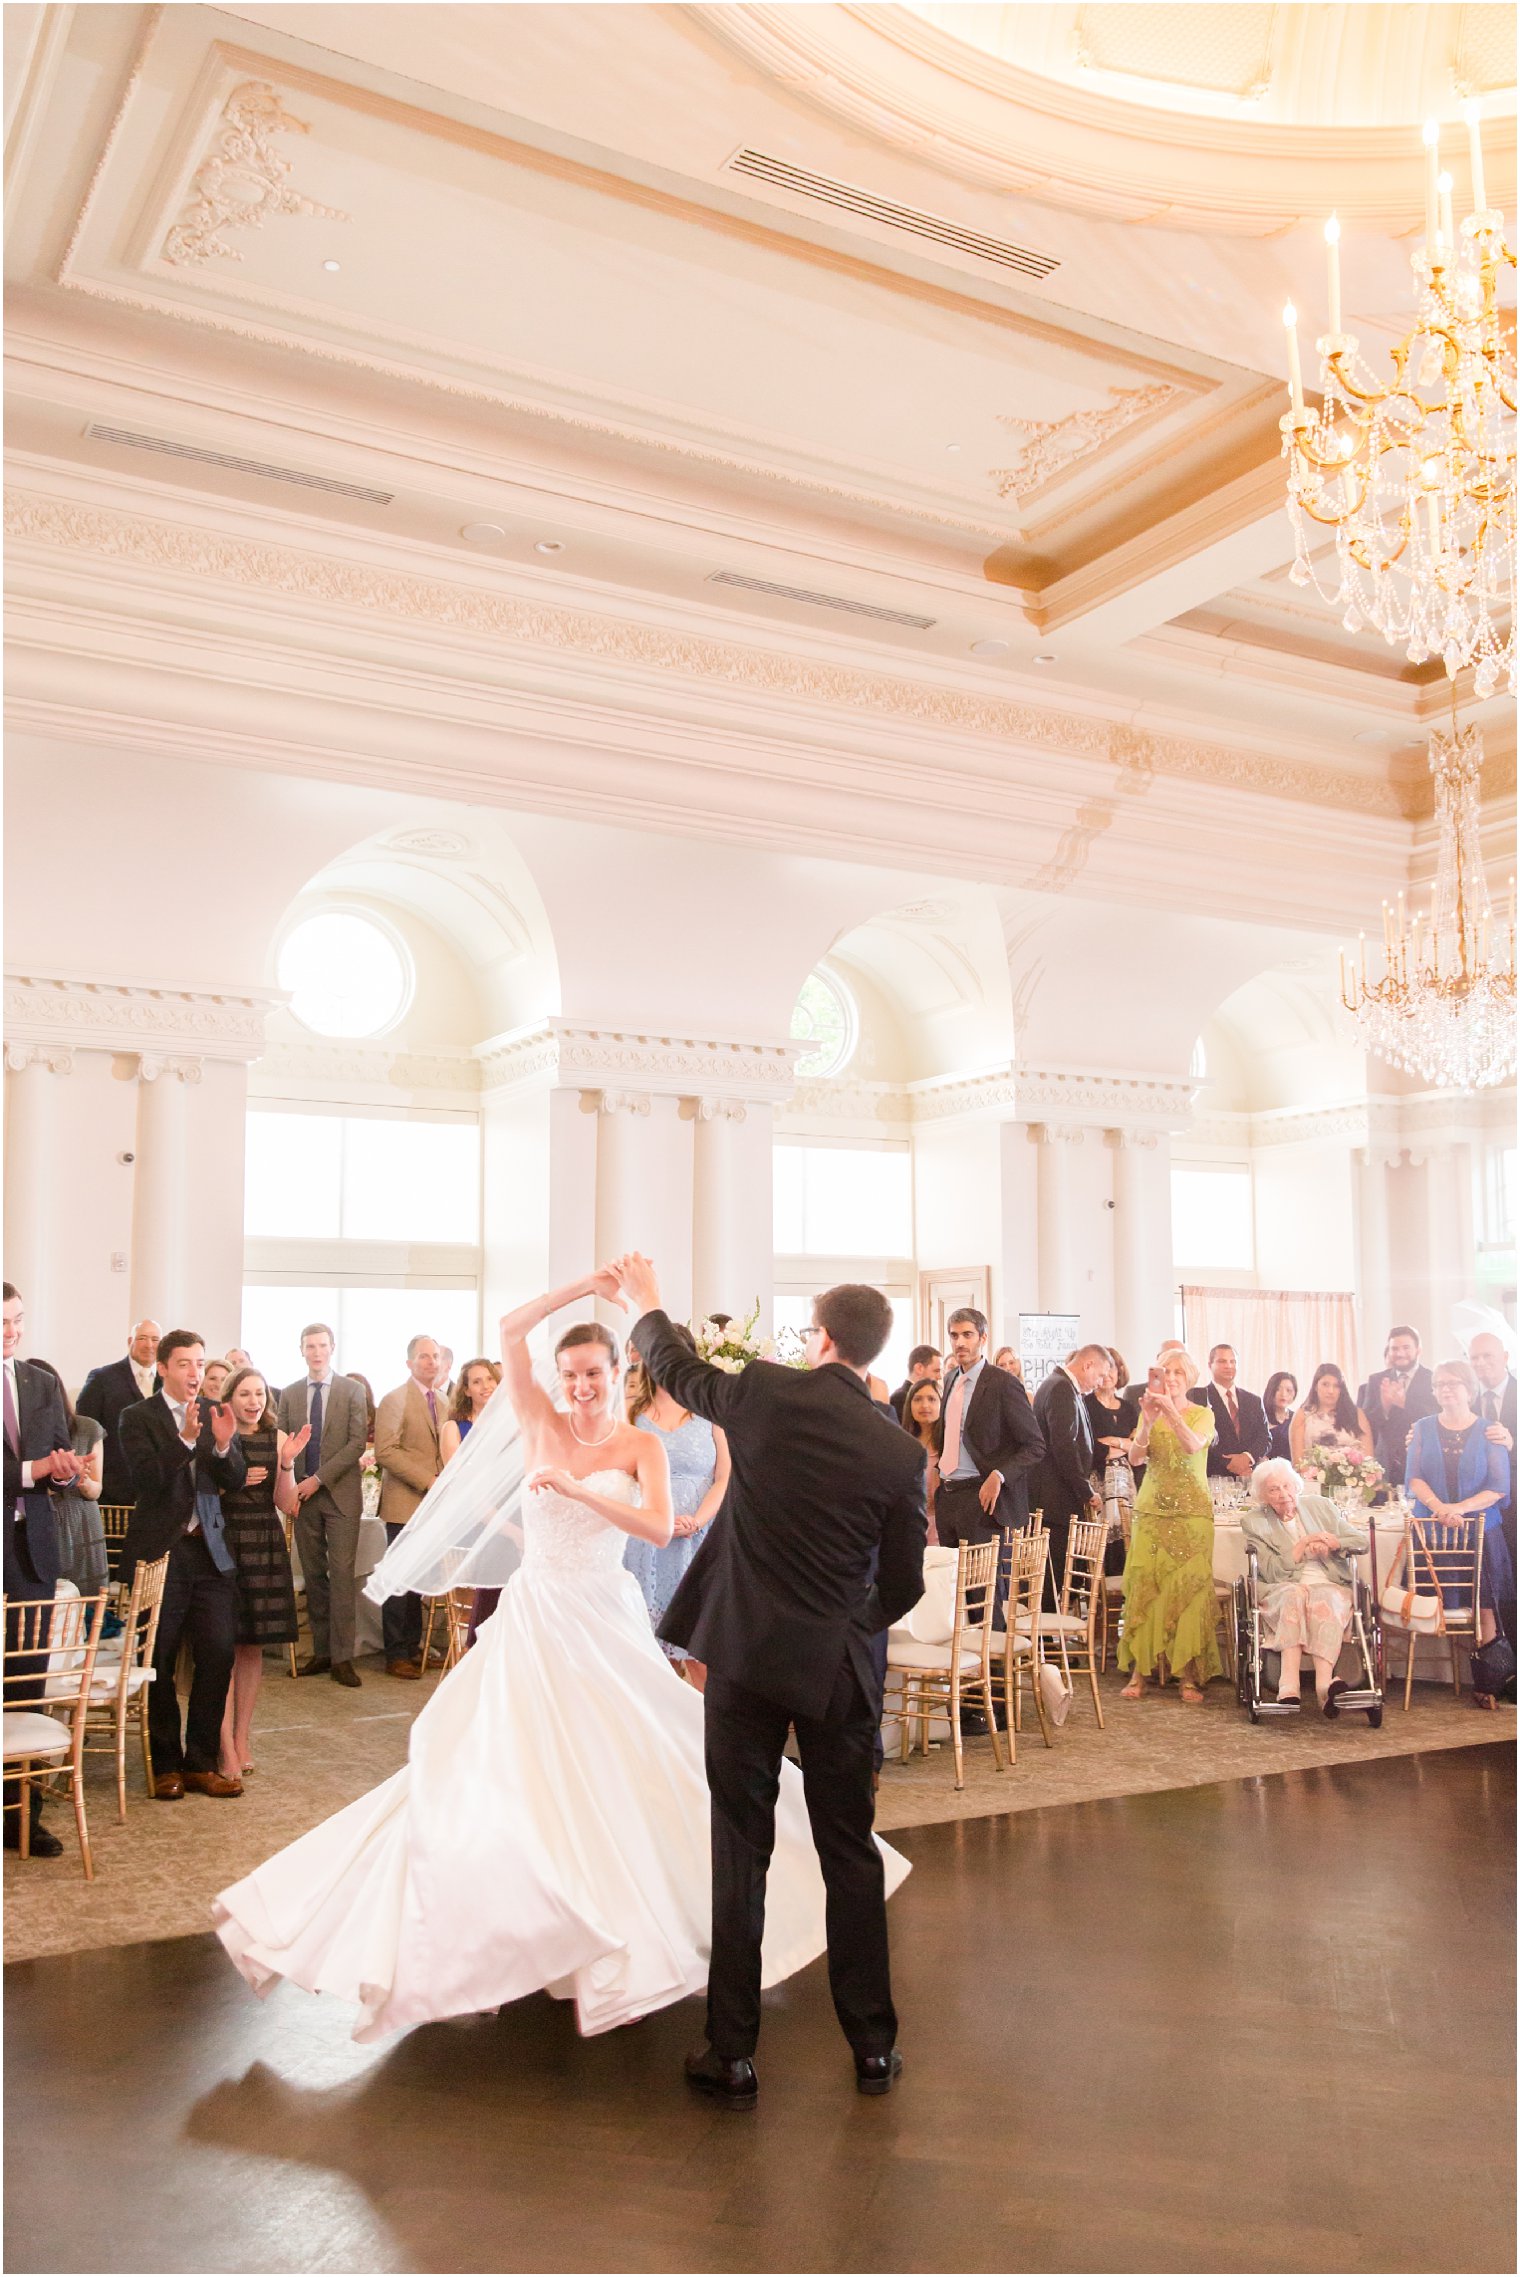 First dance at Park Chateau